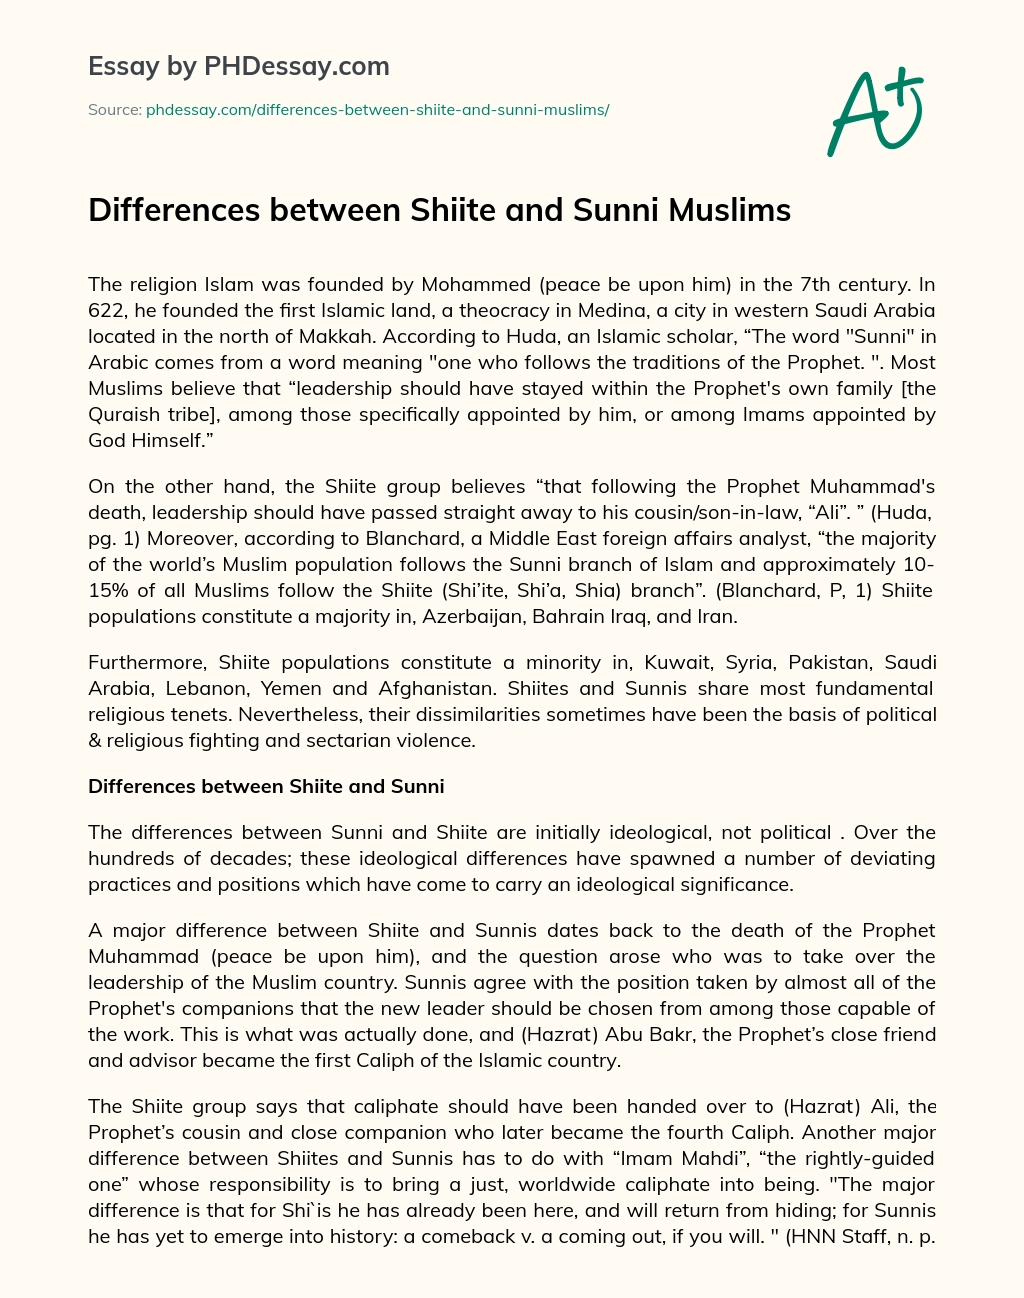 Differences between Shiite and Sunni Muslims essay